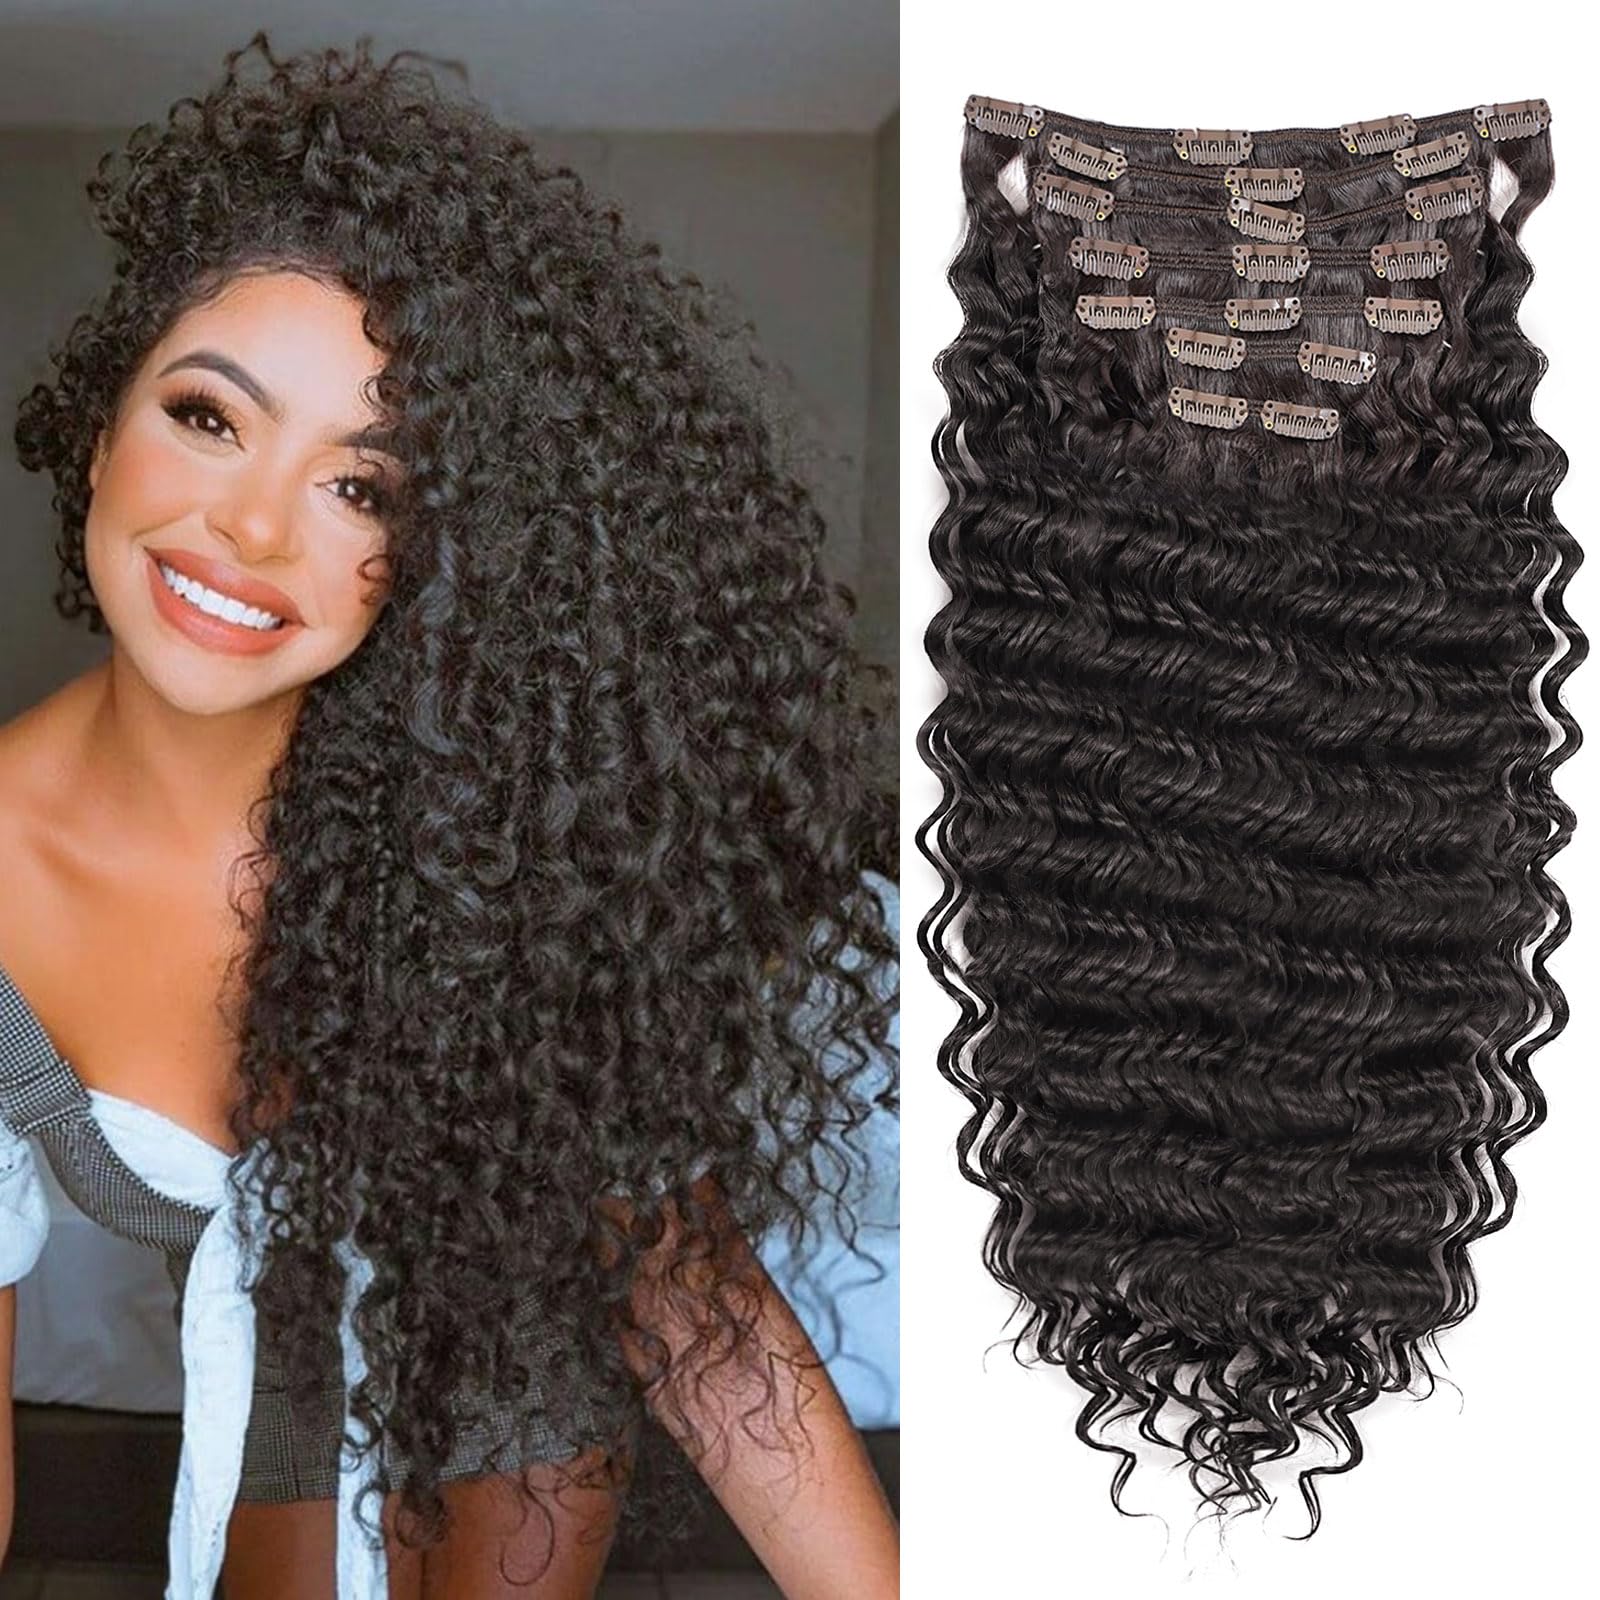 MEEPO Dark Brown Curly Clip In Hair Extension For Black Women Natural Thick Deep Wave Hair Extension Clips Synthetic Long 24 inch real human hair extensions clip in Hairpiece (2#(Pack of 7))